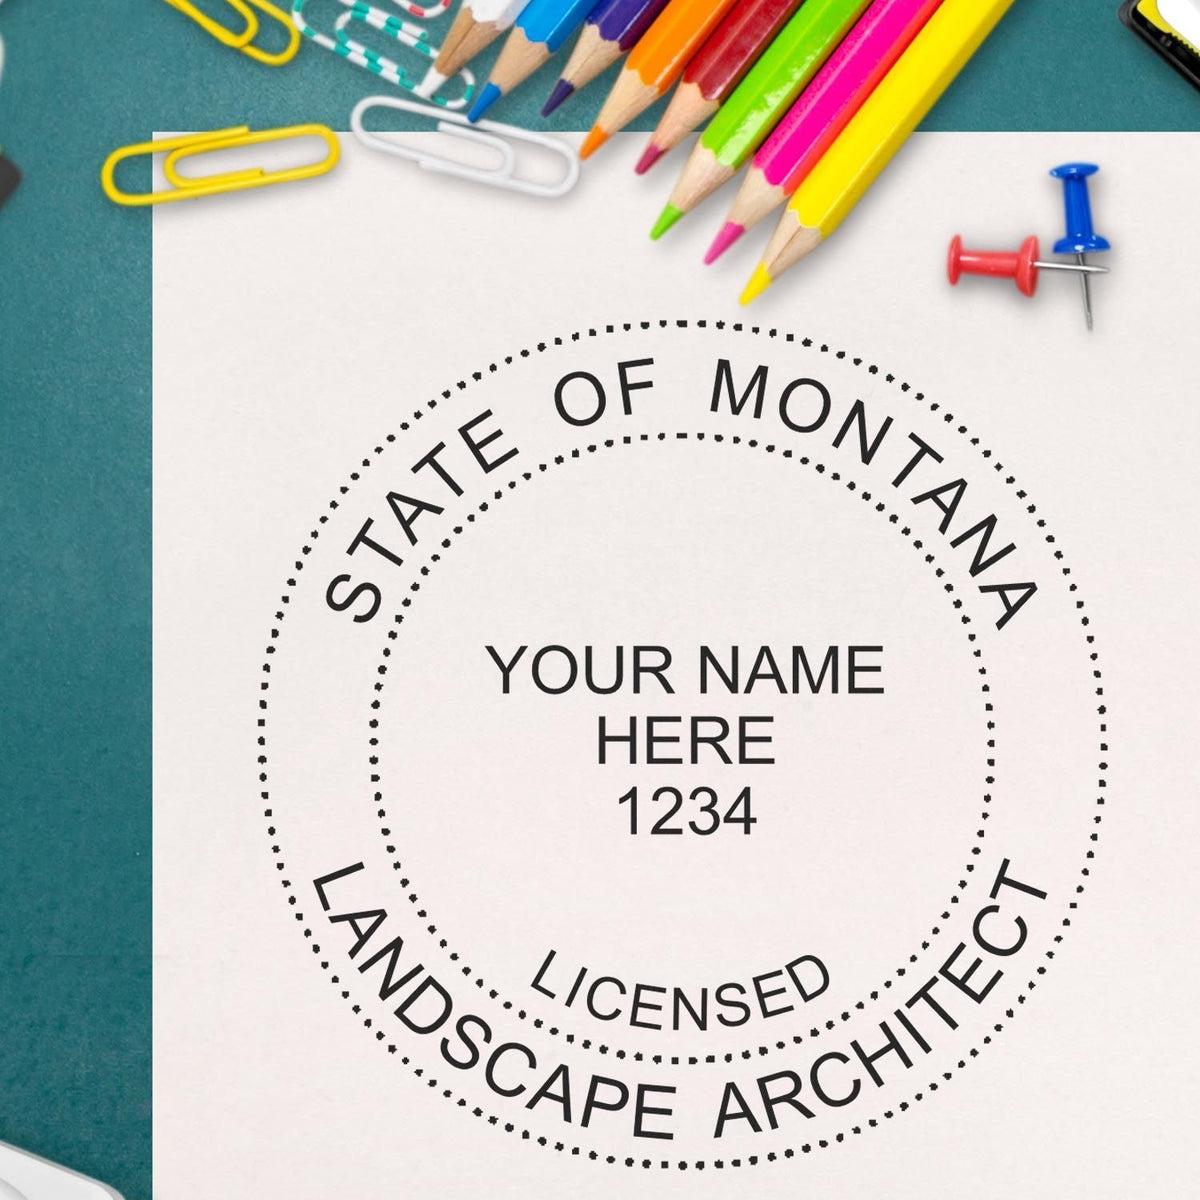 A stamped impression of the Digital Montana Landscape Architect Stamp in this stylish lifestyle photo, setting the tone for a unique and personalized product.